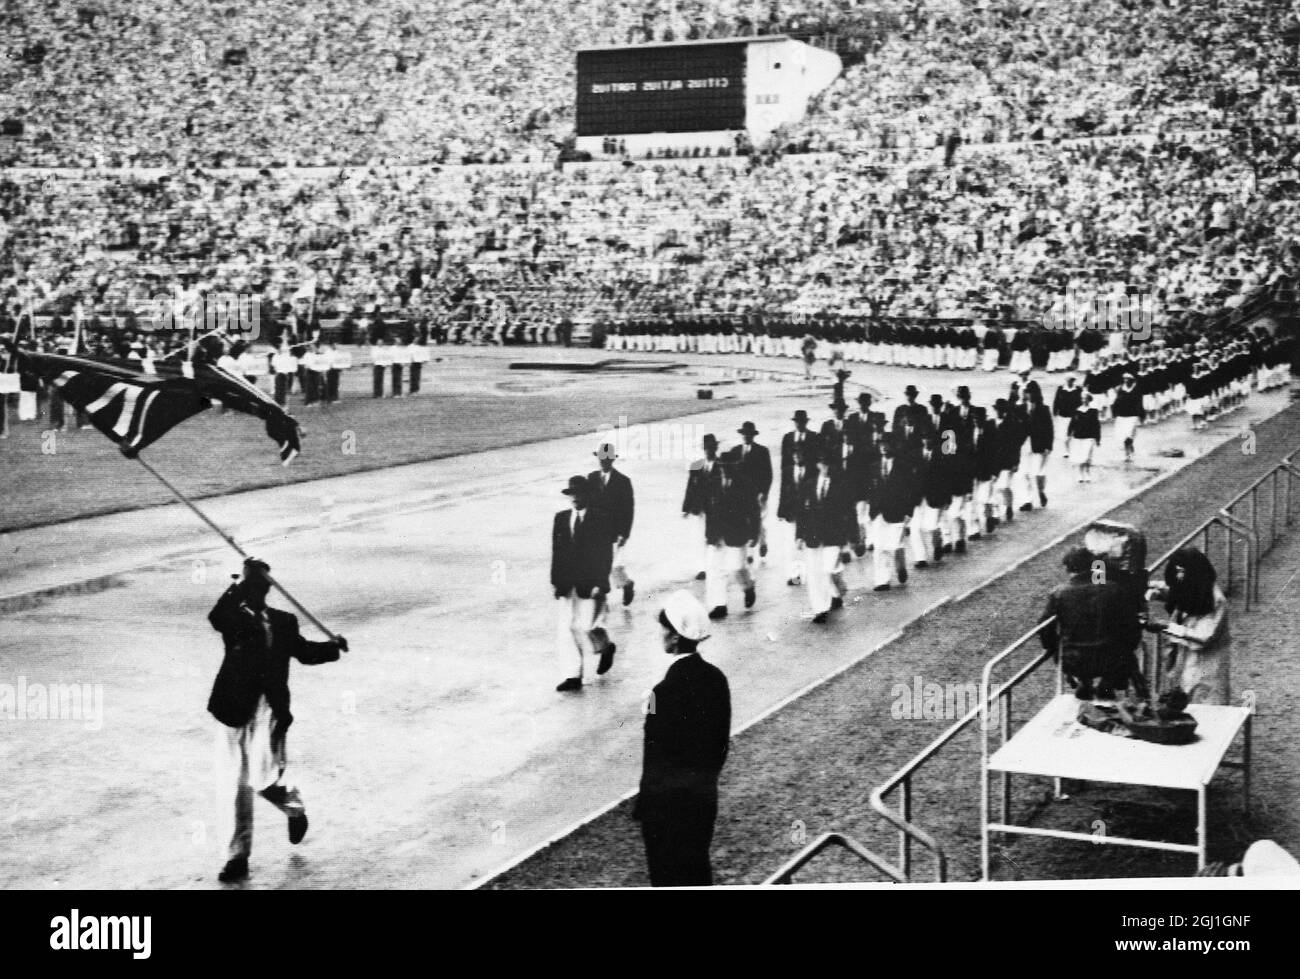 BRITAIN ' S TEAM AT OPENING OF 1952 OLYMPIC GAMES Helsinki : The British Olympic team , led by standard - bearer Harold Whitlock , the 1936 Olympic walking champion , parading round the stadium at the opening of the 1952 Olympic Games . Over 6,000 athletes from 70 nations will be competing in the Games . 19th July 1952 Stock Photo